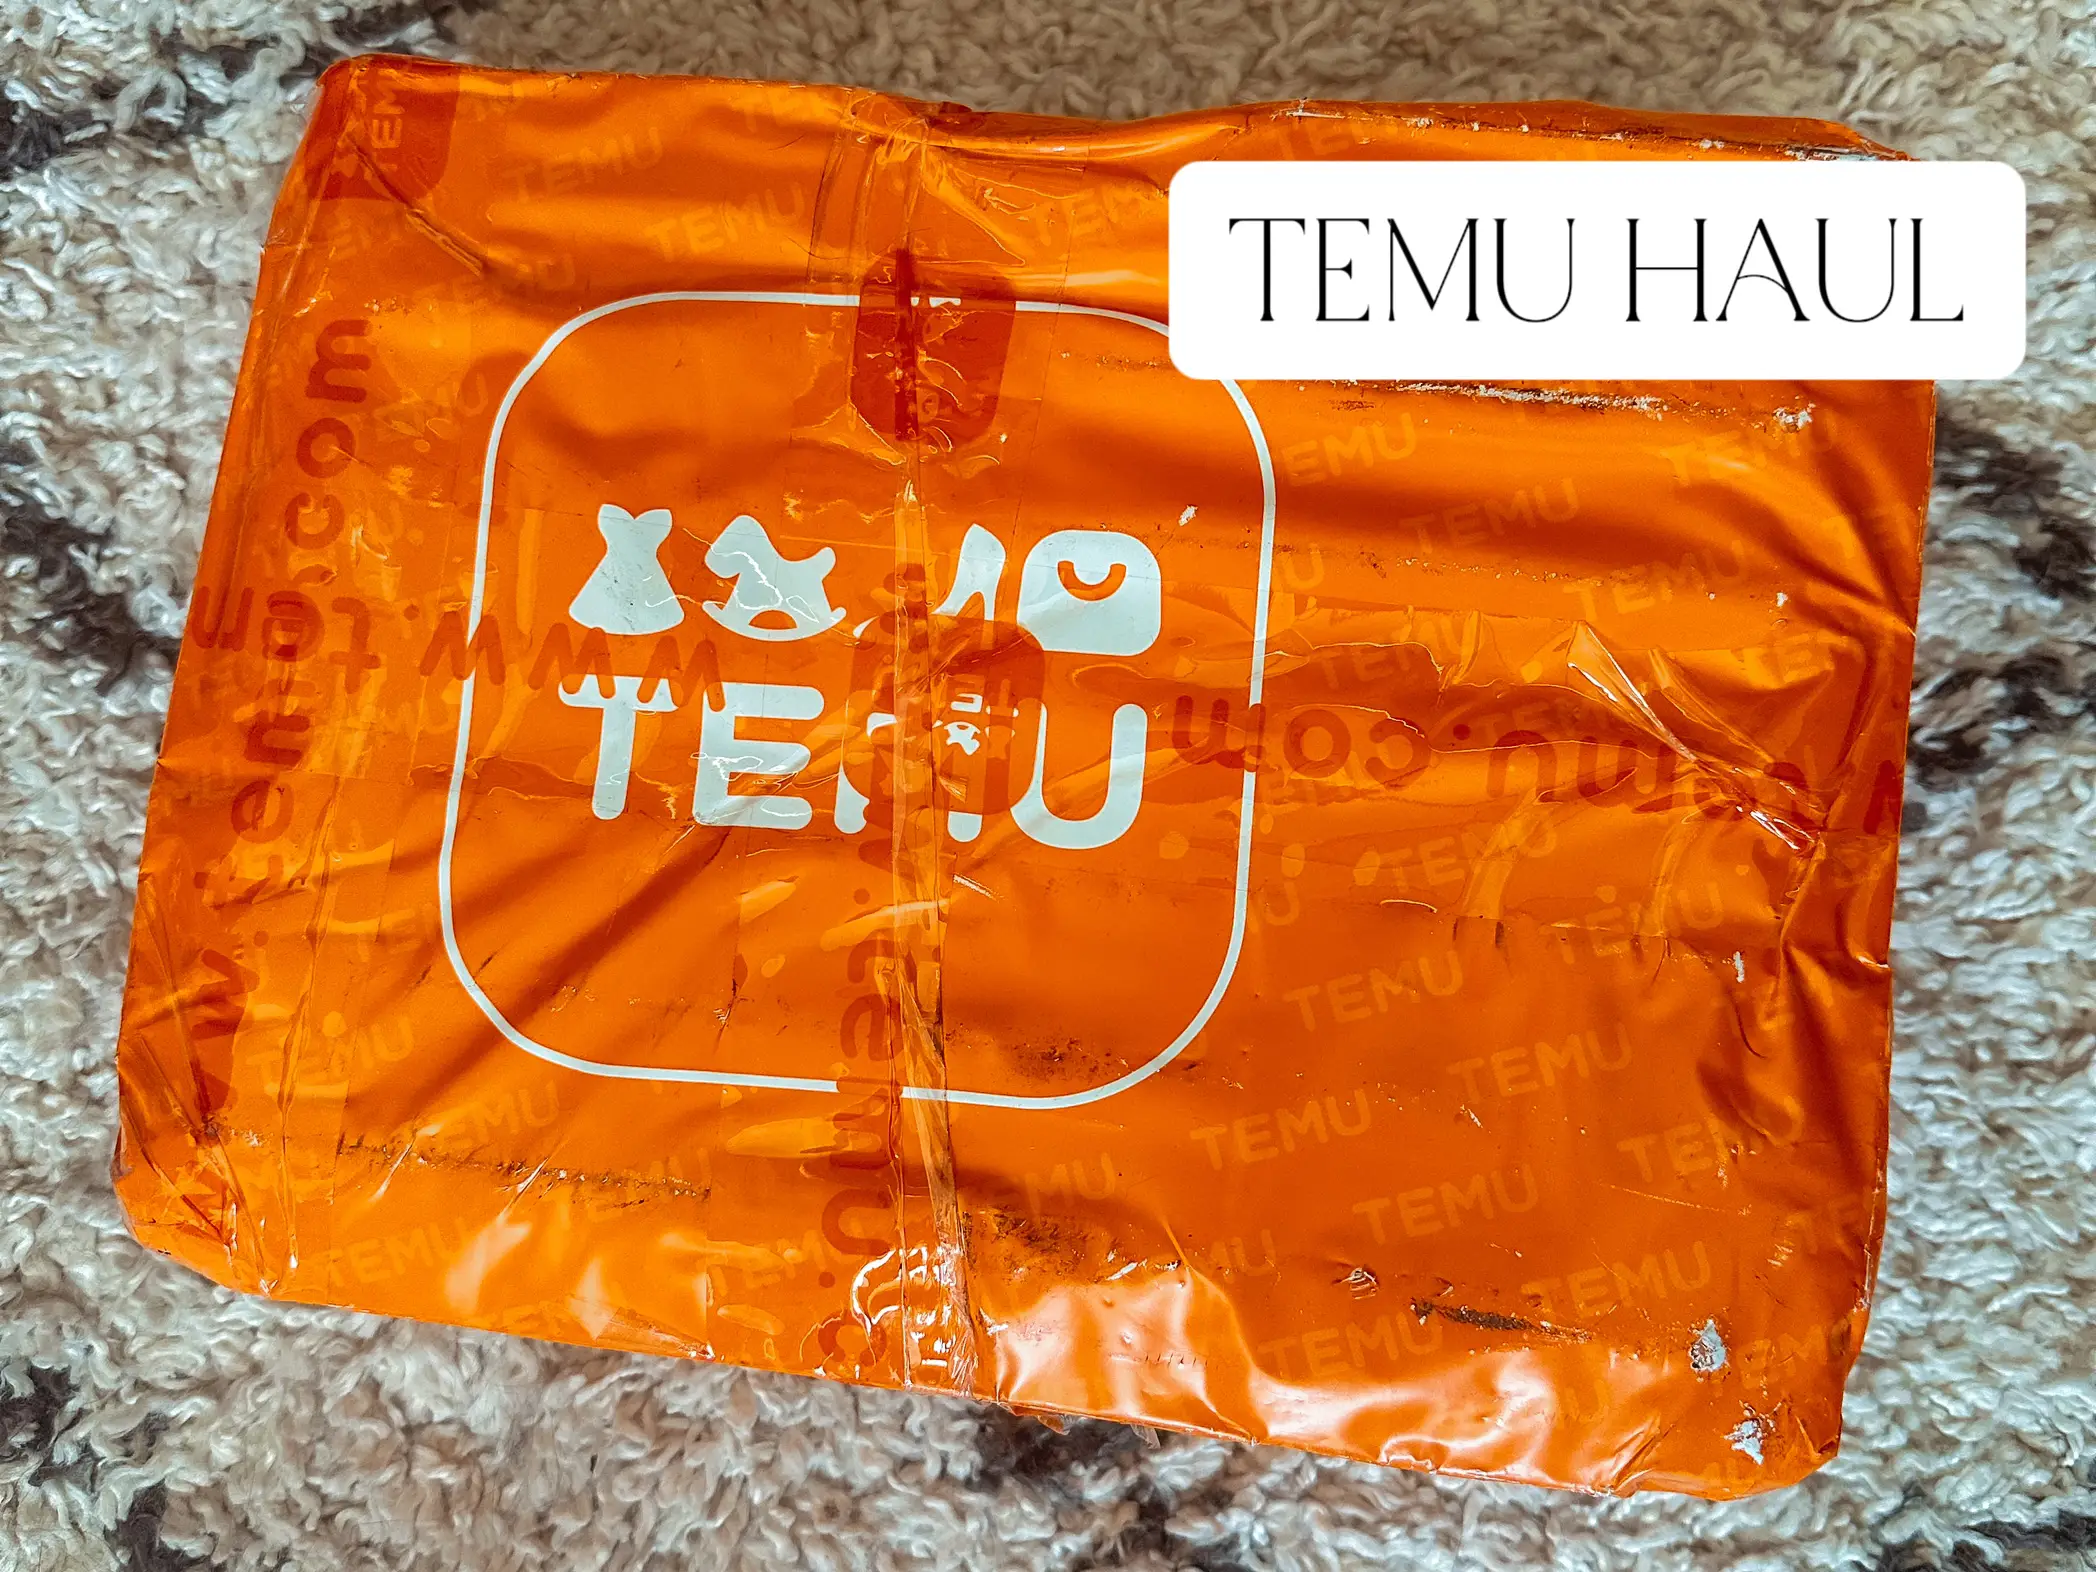 Should I share the rest of my Temu haul or does no one care 😆 #temu #